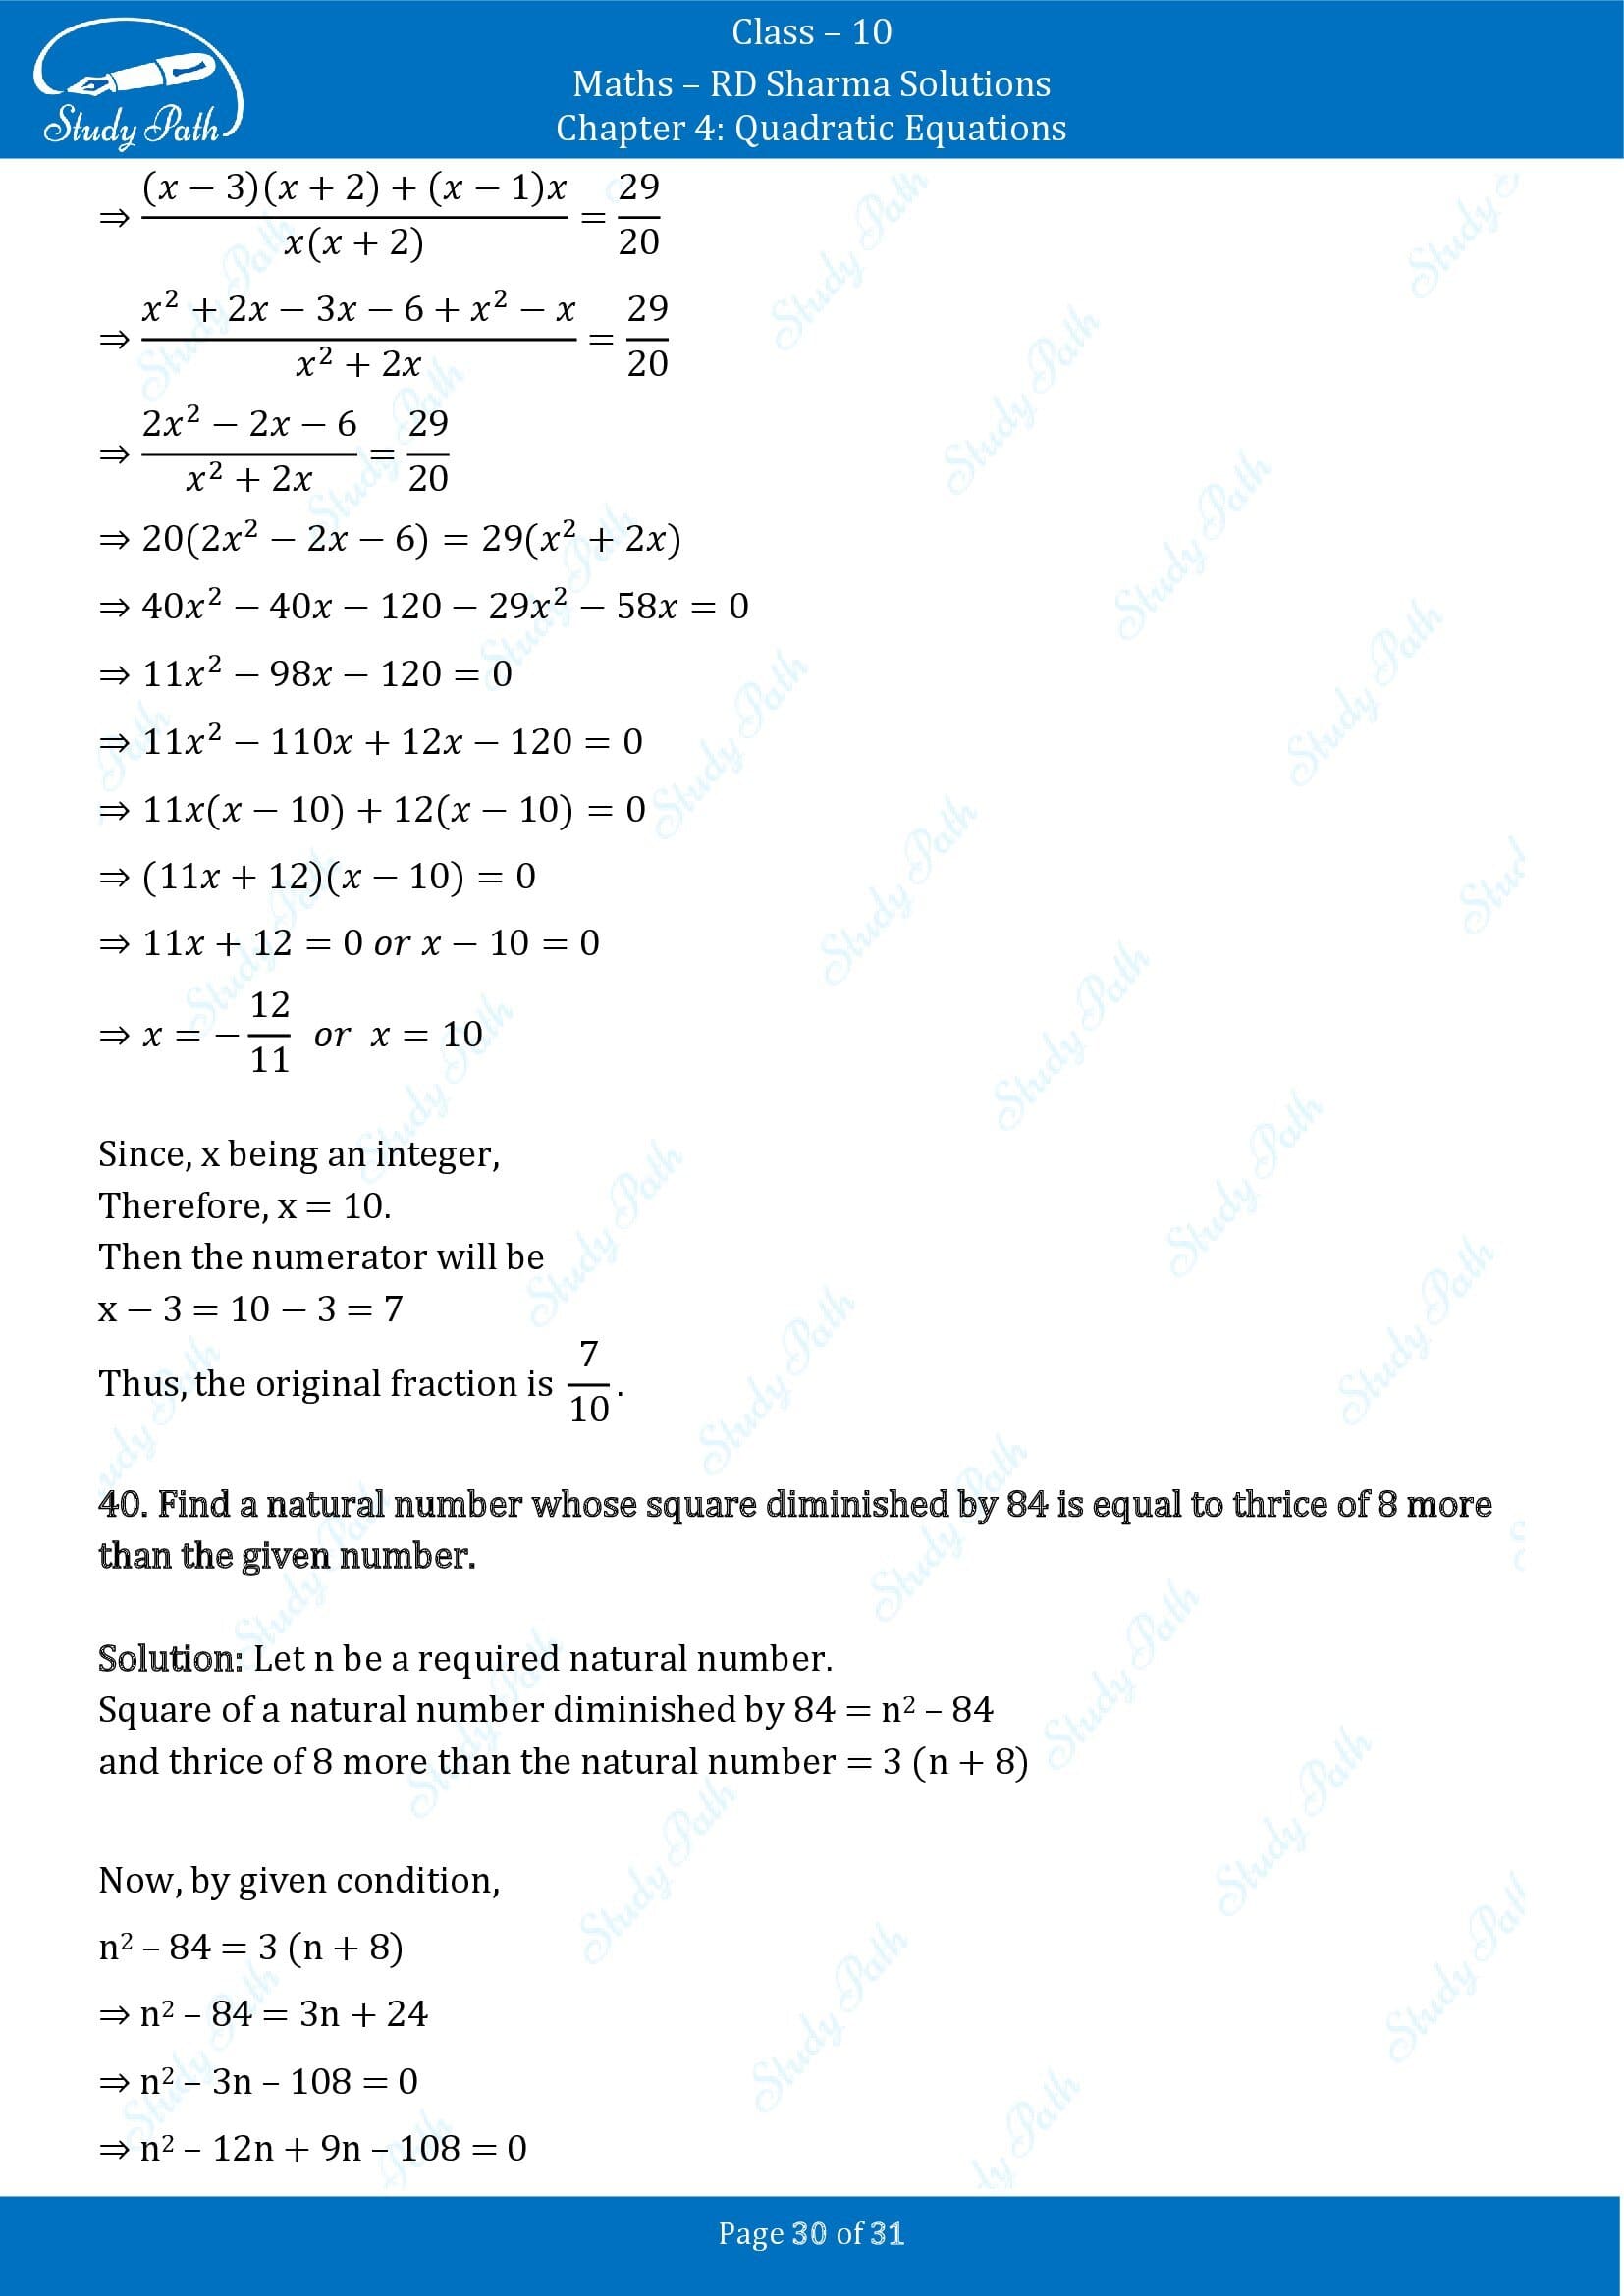 RD Sharma Solutions Class 10 Chapter 4 Quadratic Equations Exercise 4.7 00030